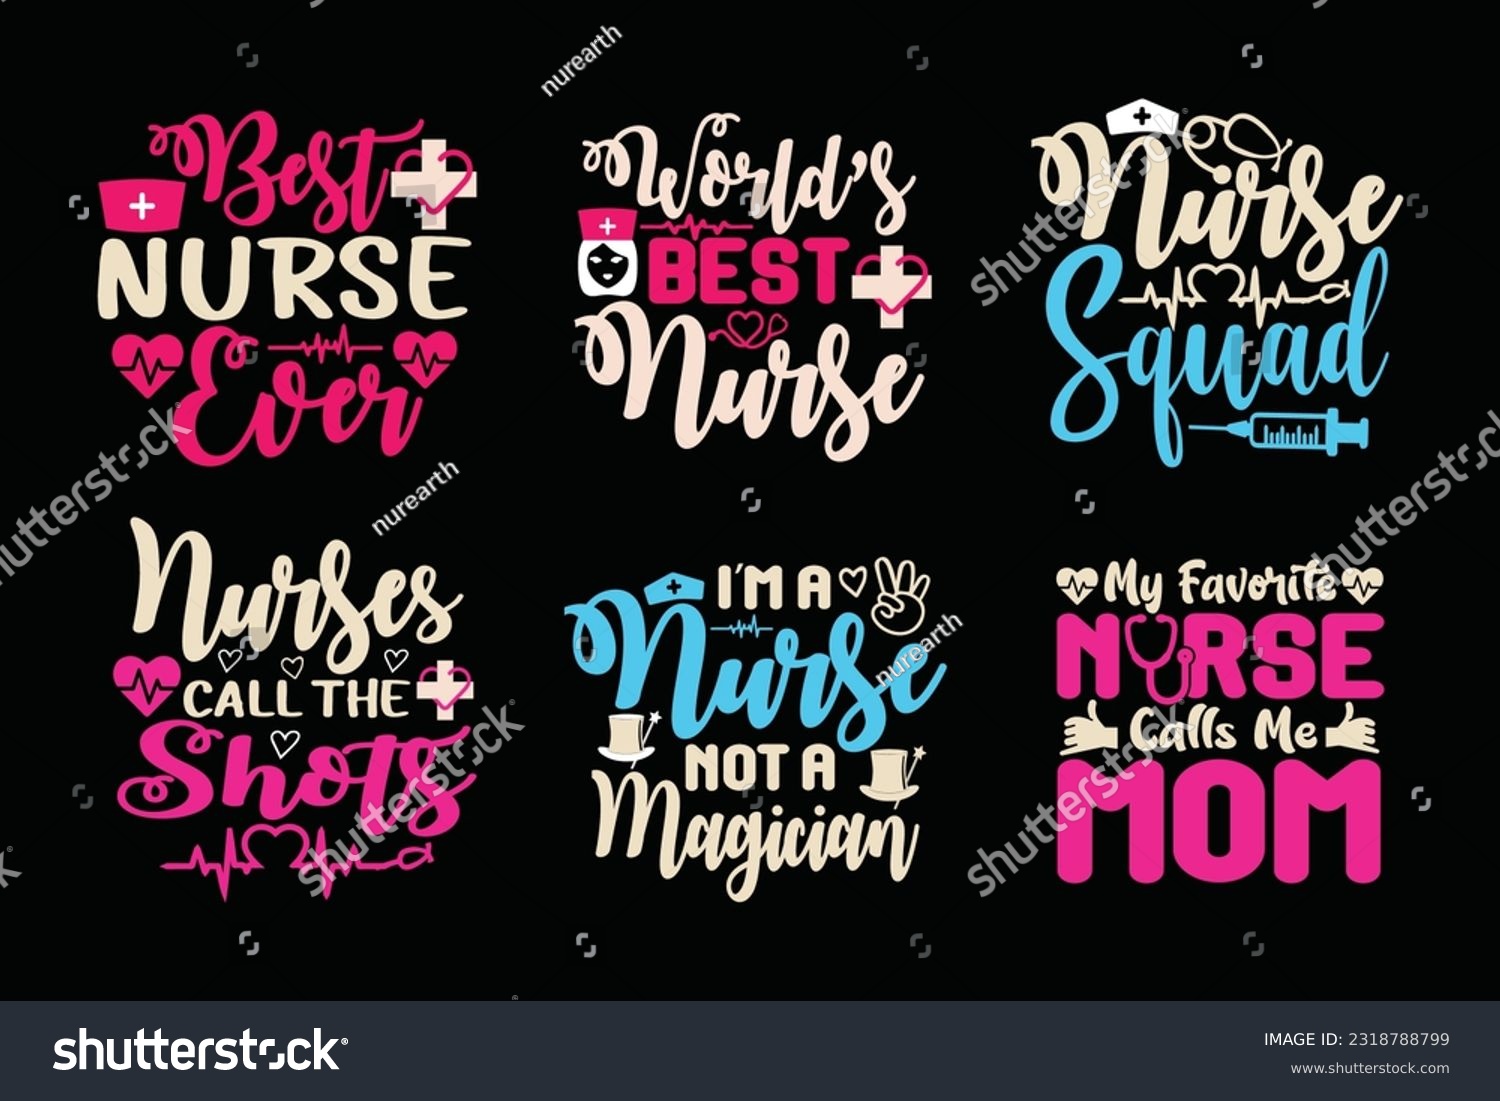 SVG of Wife Mom Nurse woman Mom,Mummy colorful Typography svg t shirt,Mom lover, Nurse Mama Life, Funny Mother's Day Gift Graphic vector art by poster, banner,sticker,Mug,Cup,car decal,Print design svg